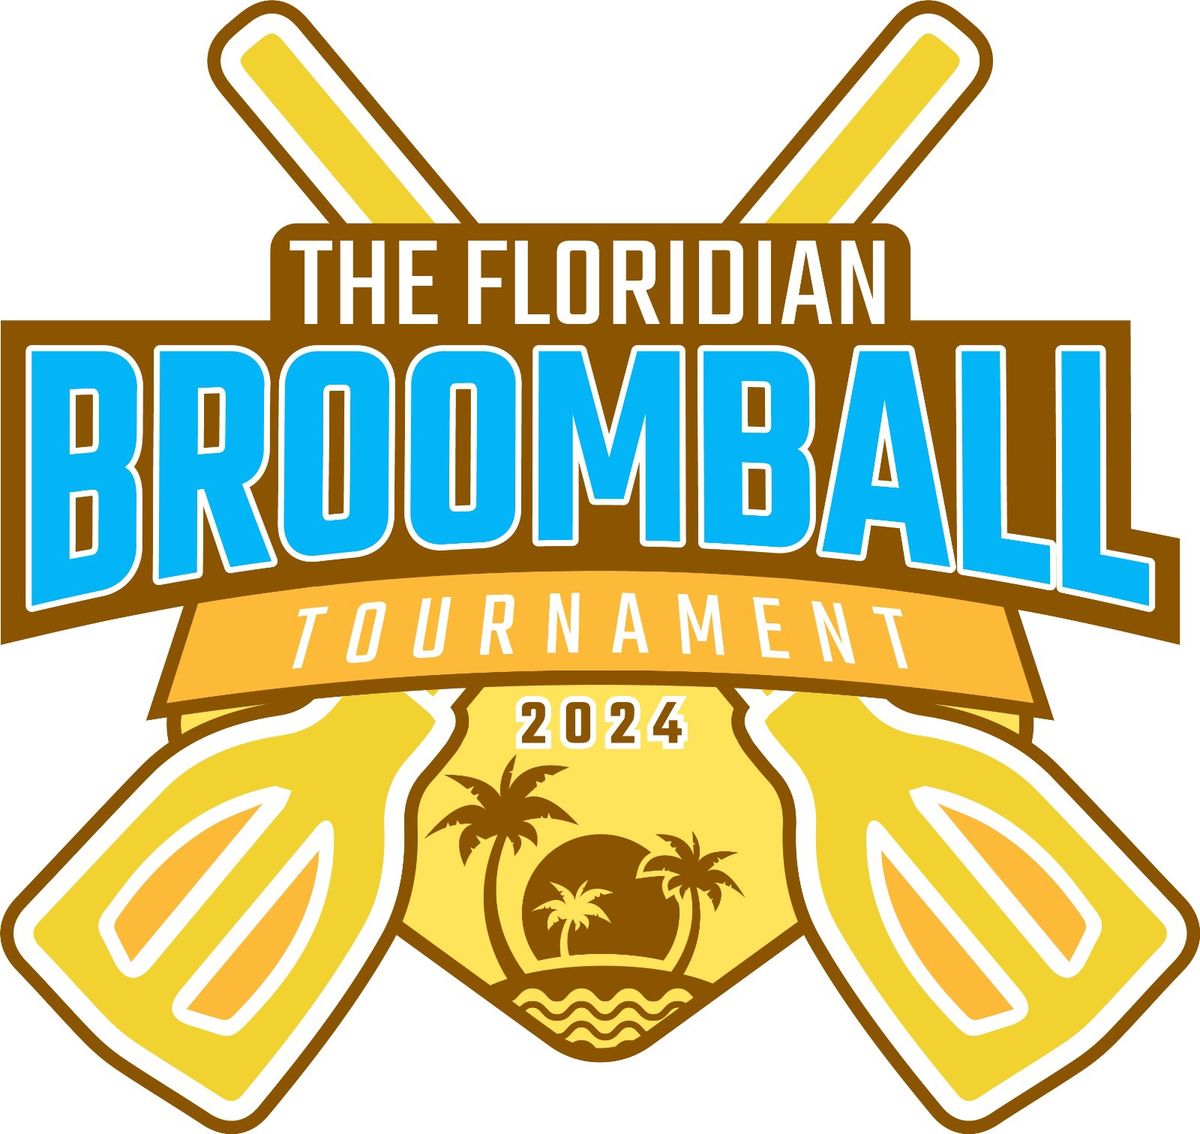 The Floridian Broomball Tournament 2024